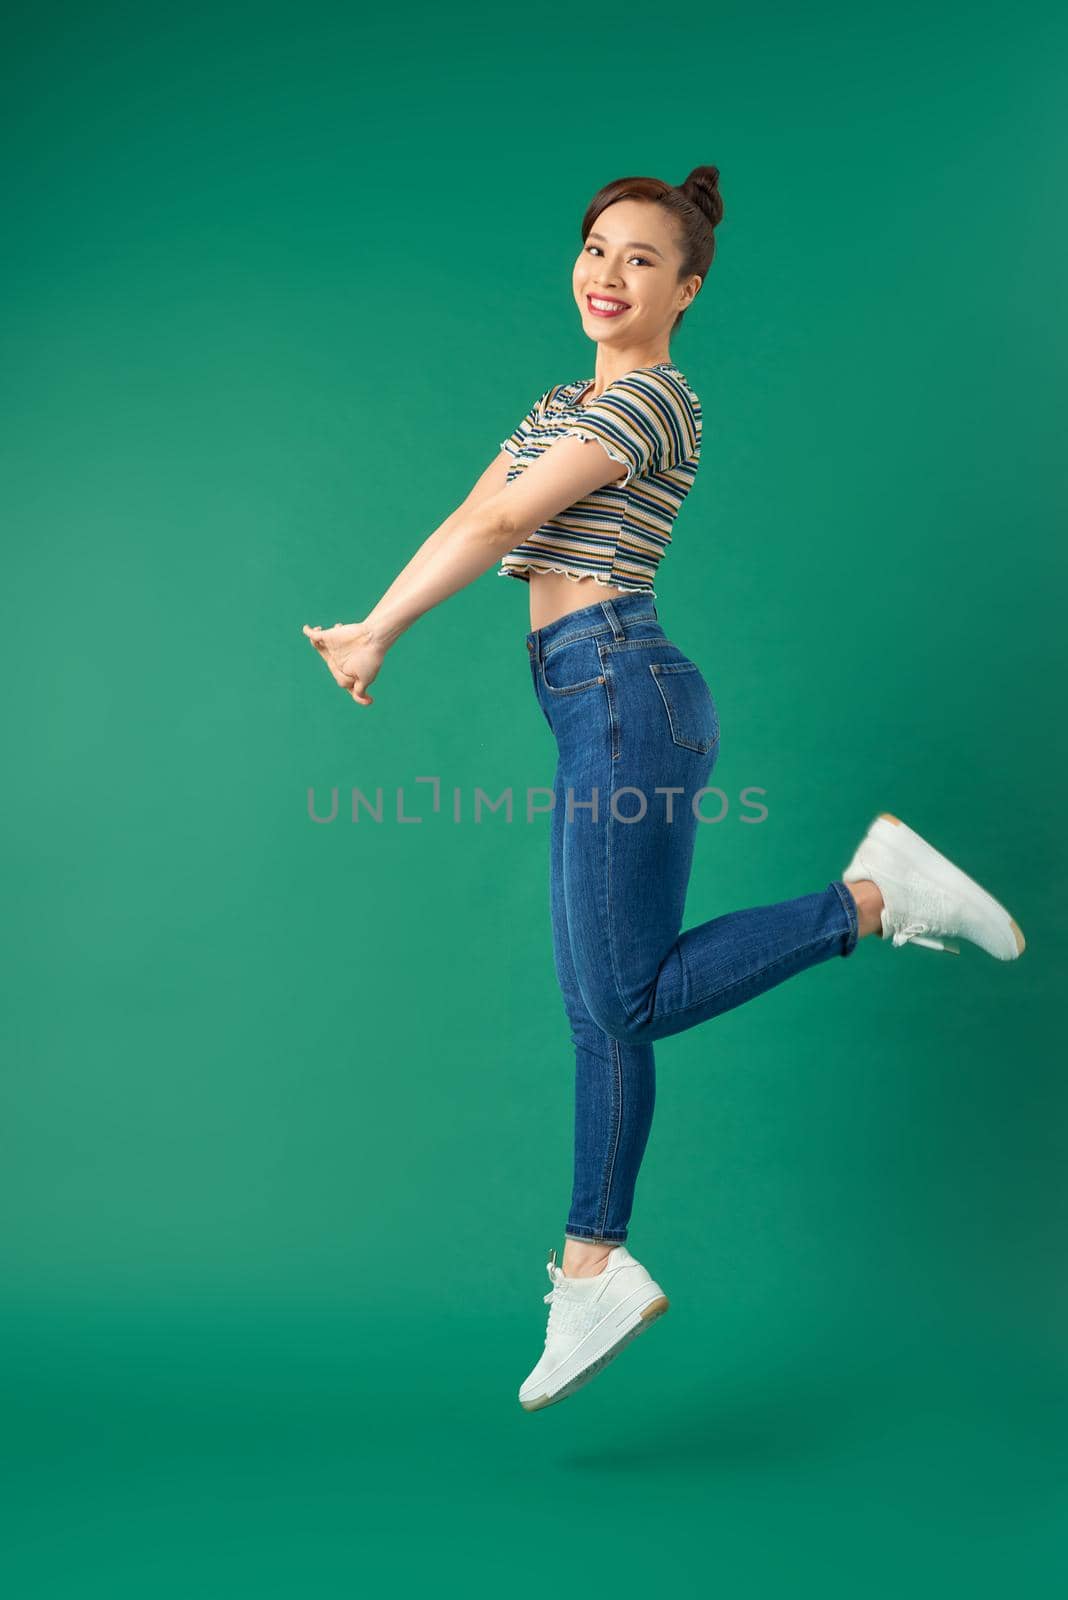 Full length of portrait of joyful young Asian woman jumping in air over green background.